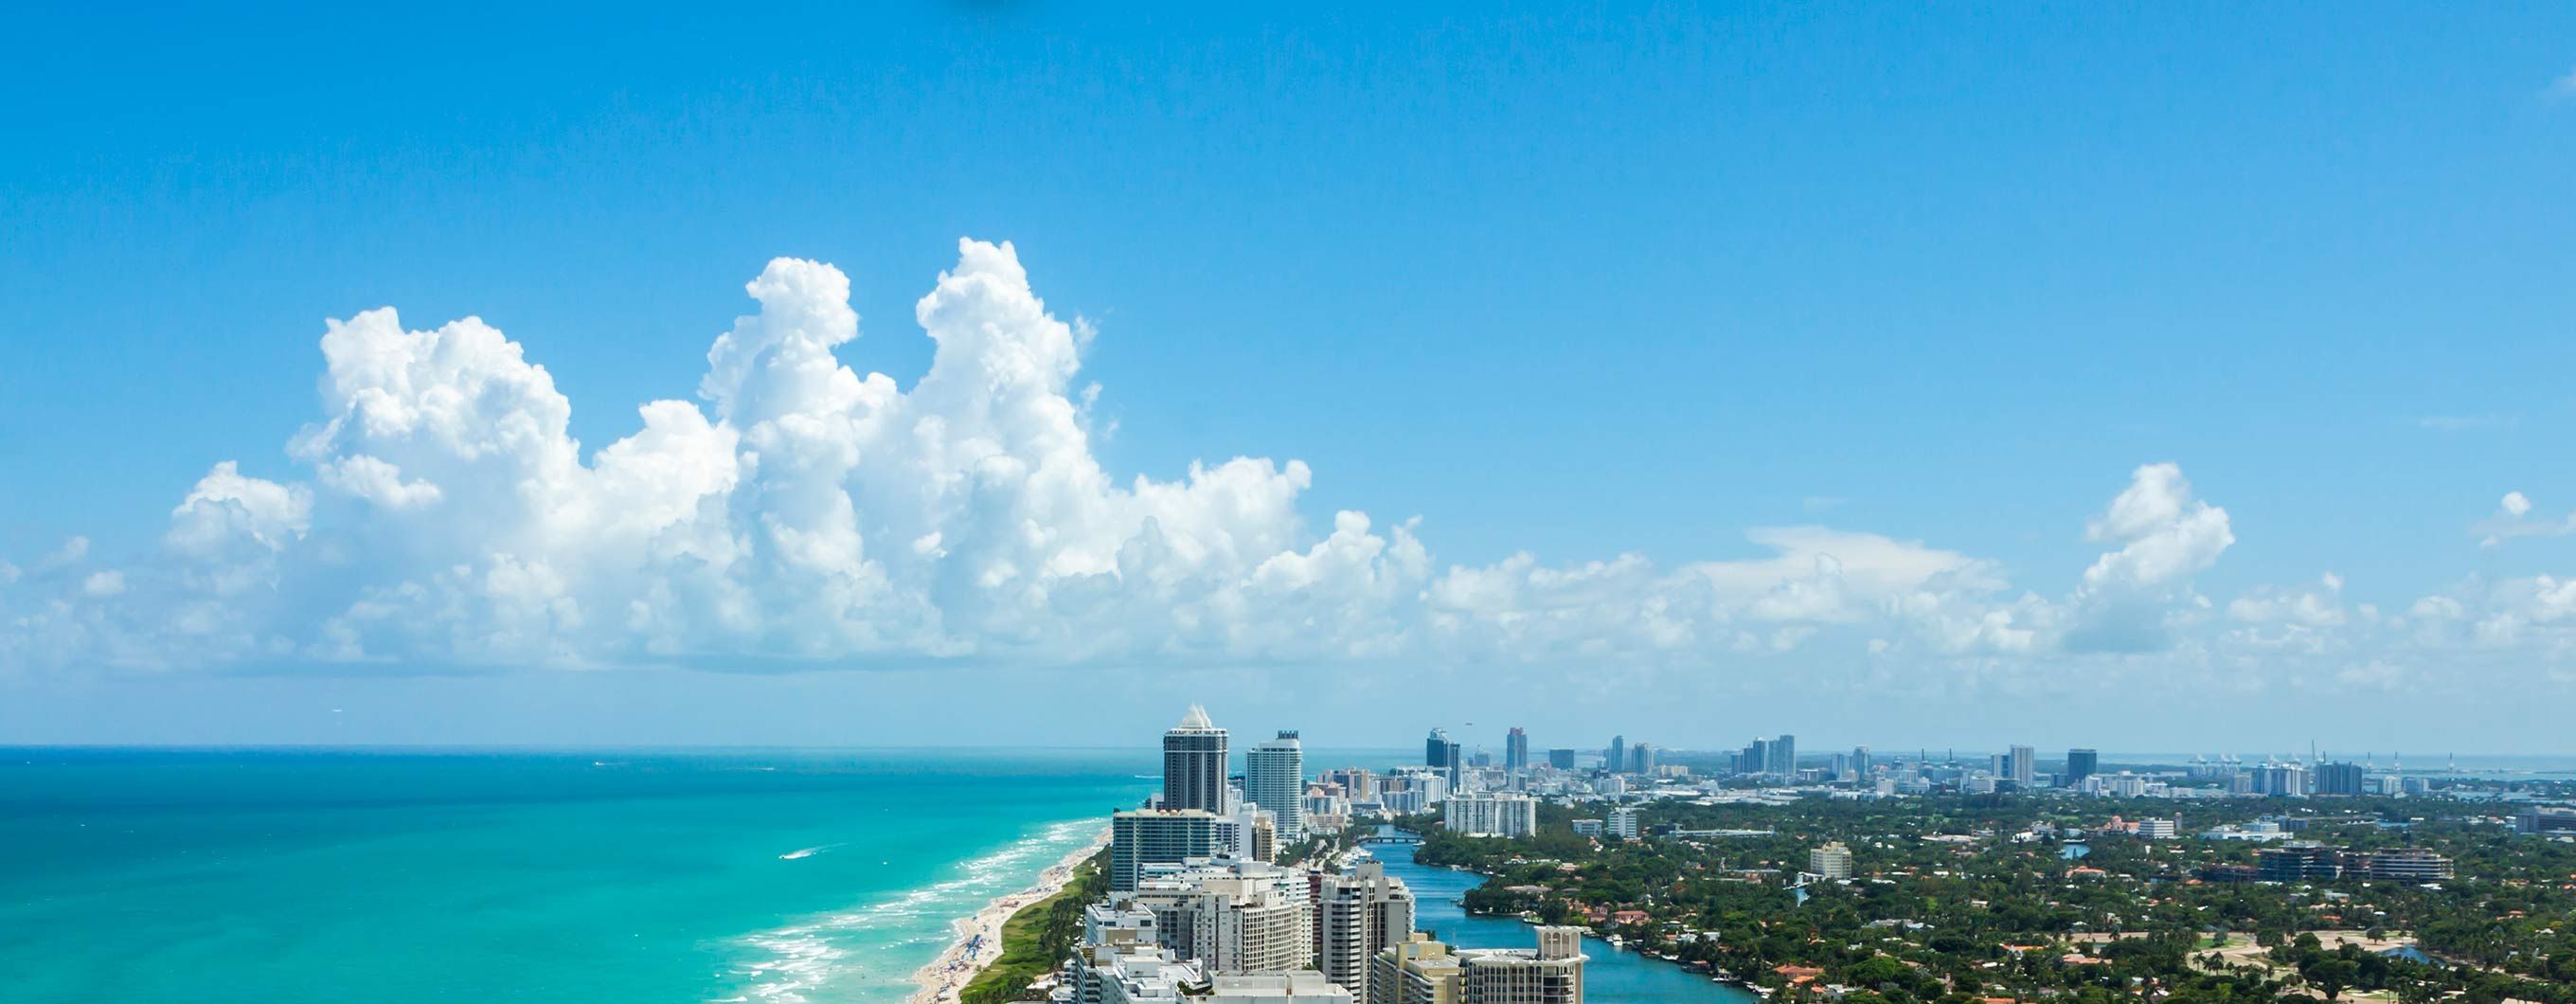 The ocean coastline in florida with buildings, trees and the beach